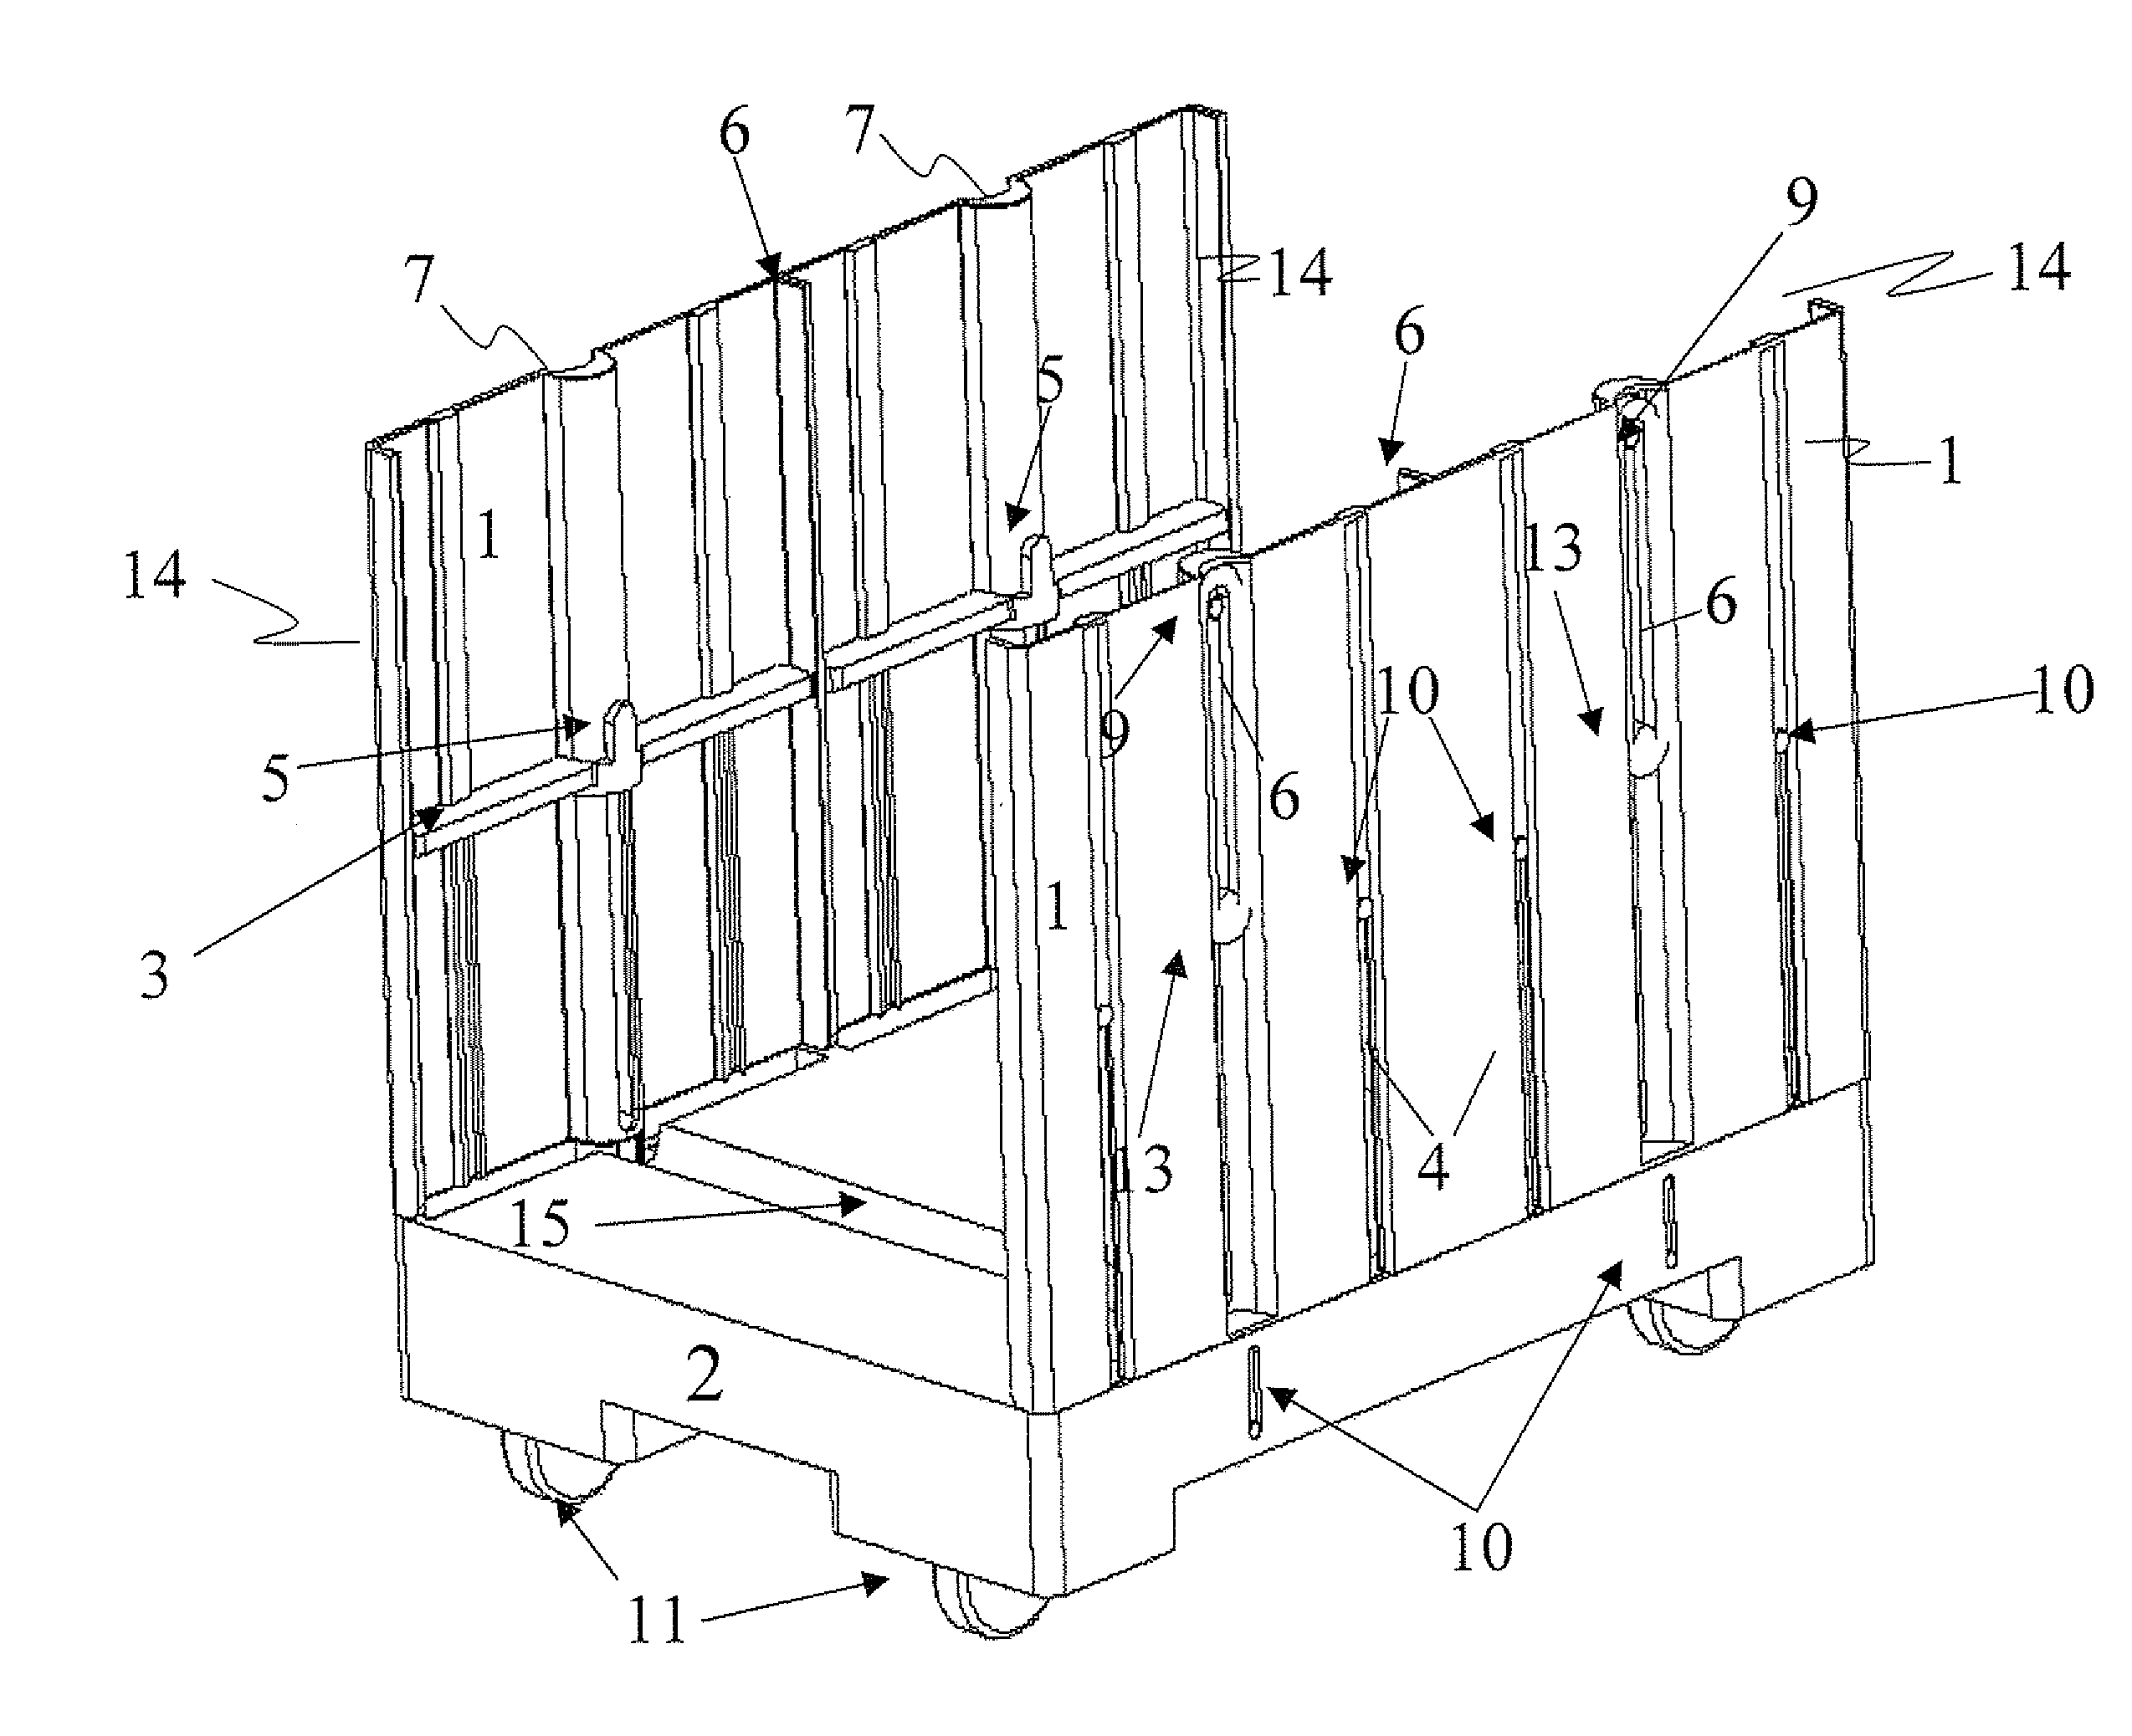 Dolly with elastically suspended load-bearing surface